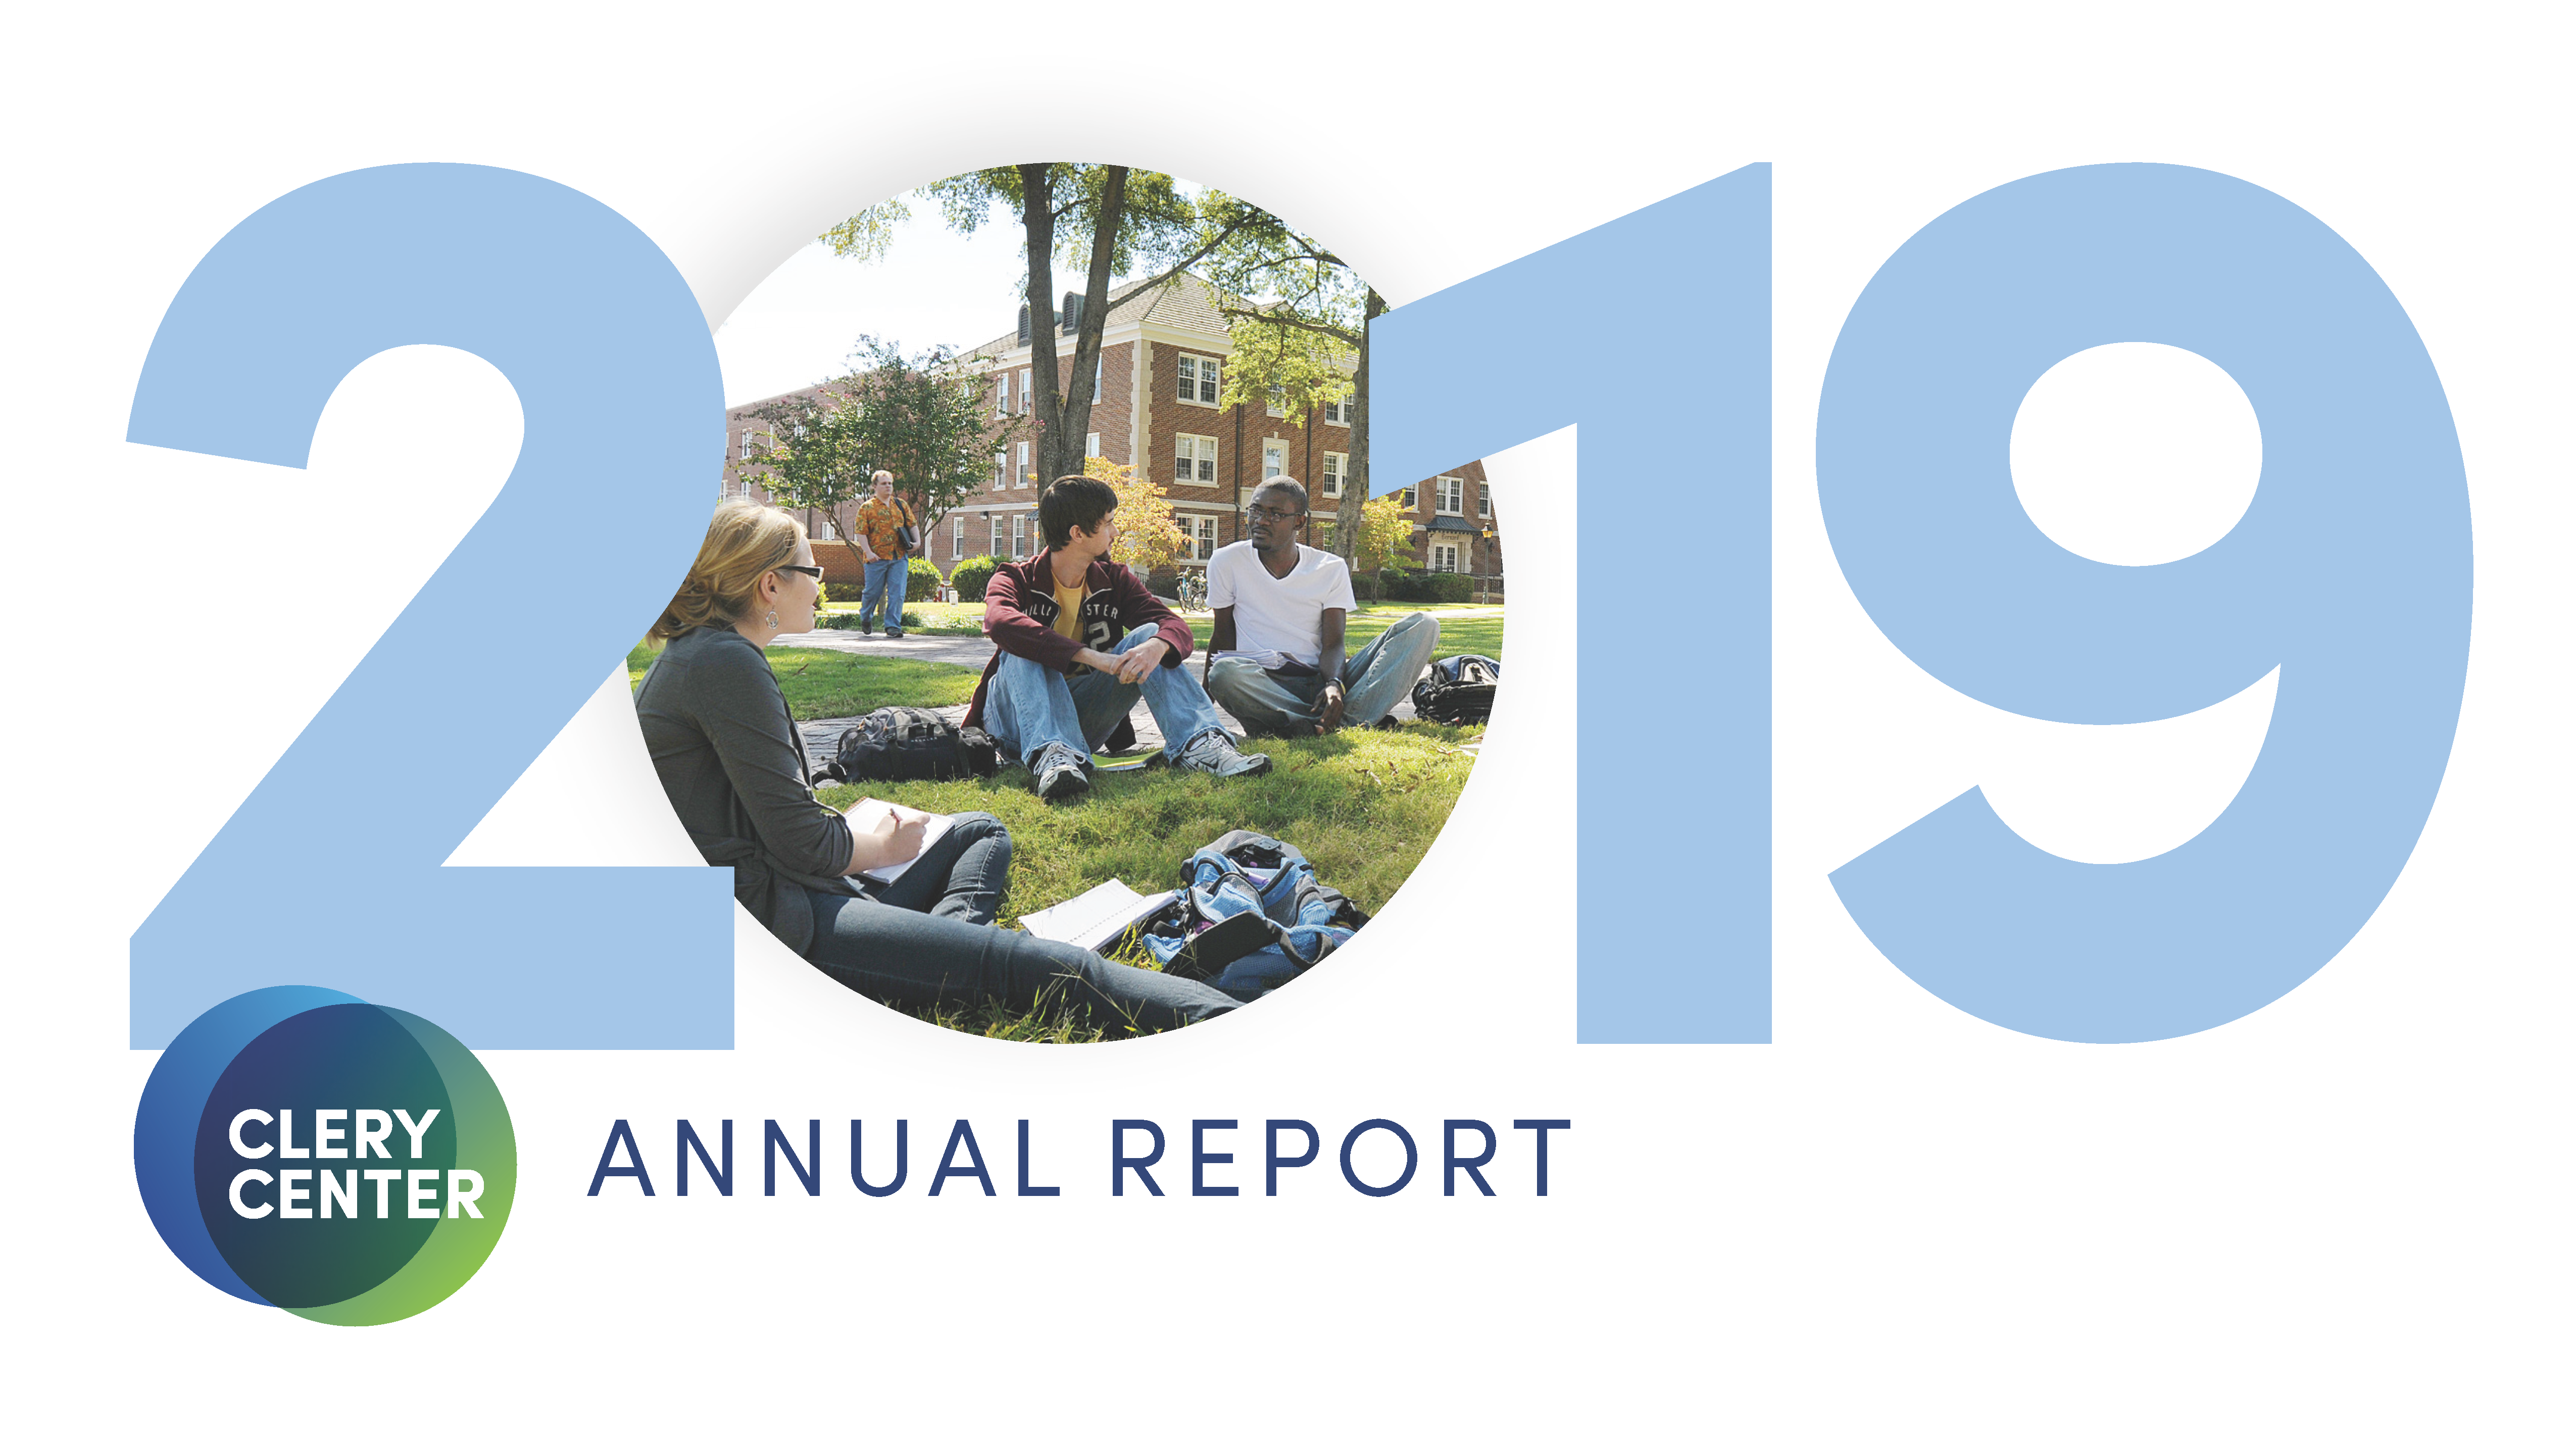 2019 Annual Report - page 1 image